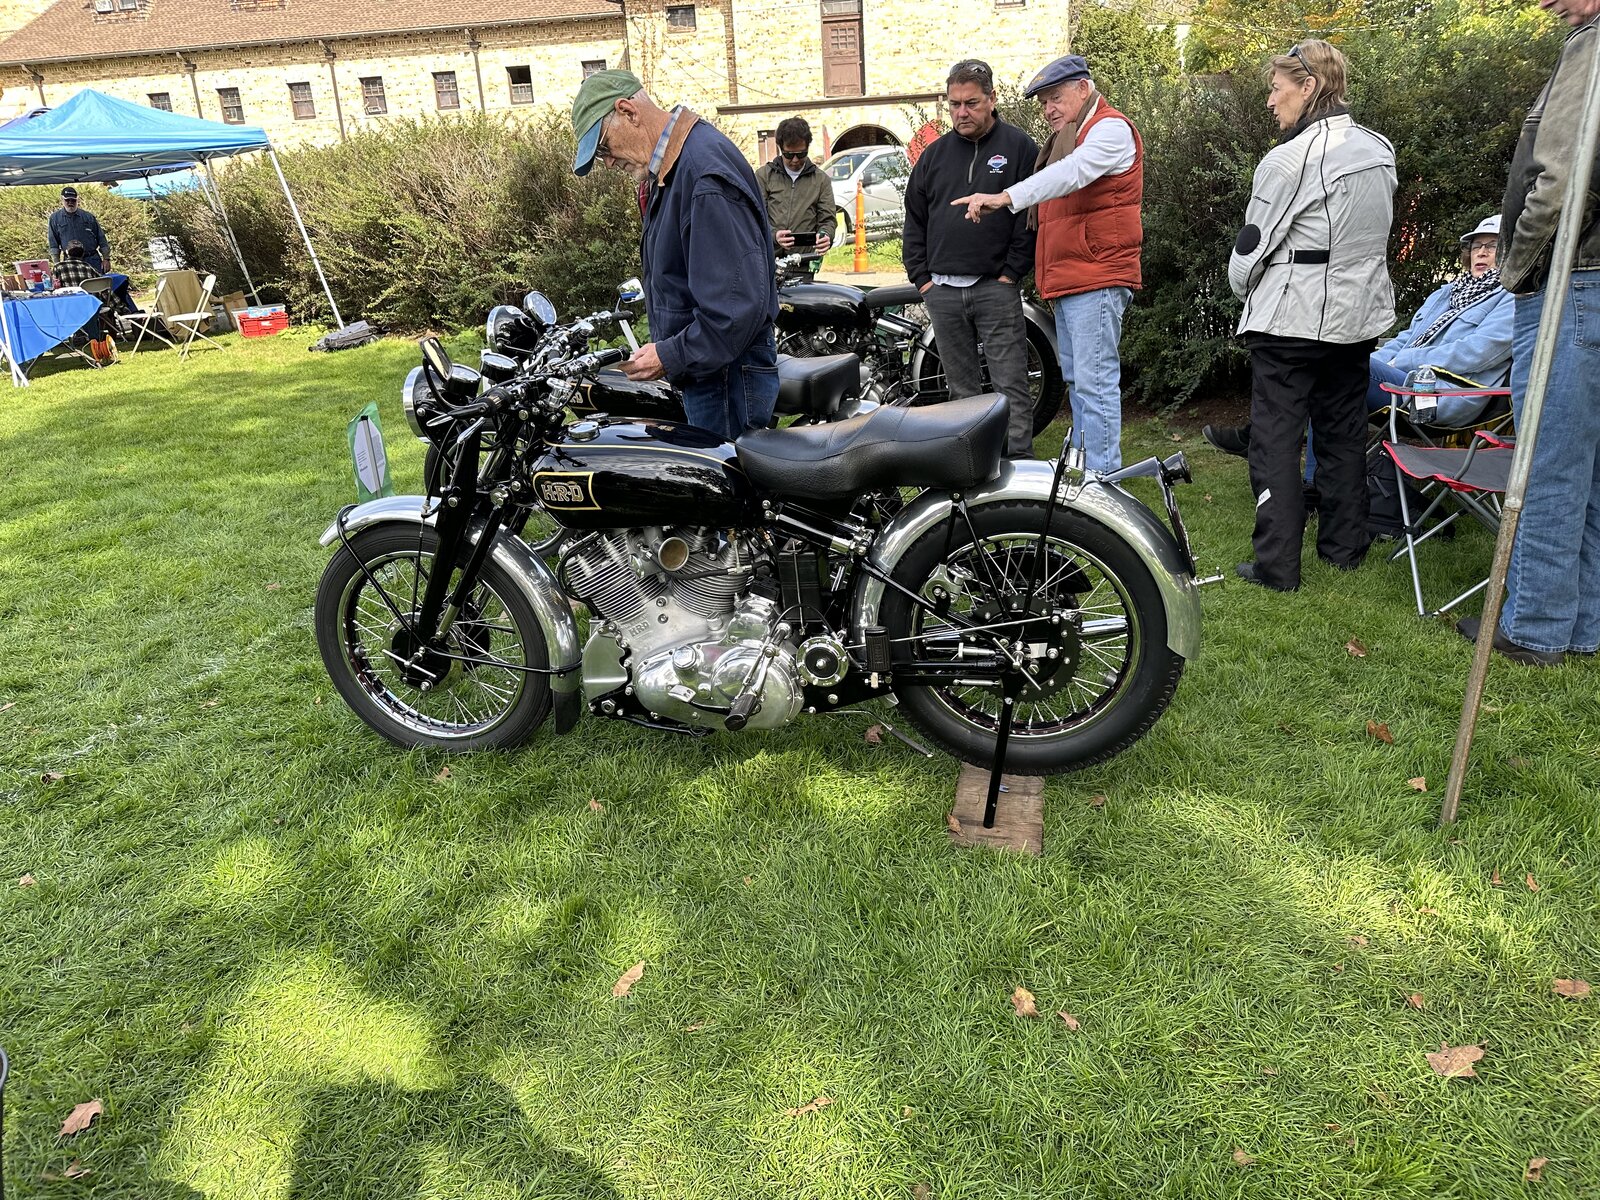 Larz Anderson Museum Eropean Motorcycle Day Boston,MA 9-7-14 and 10-14-23